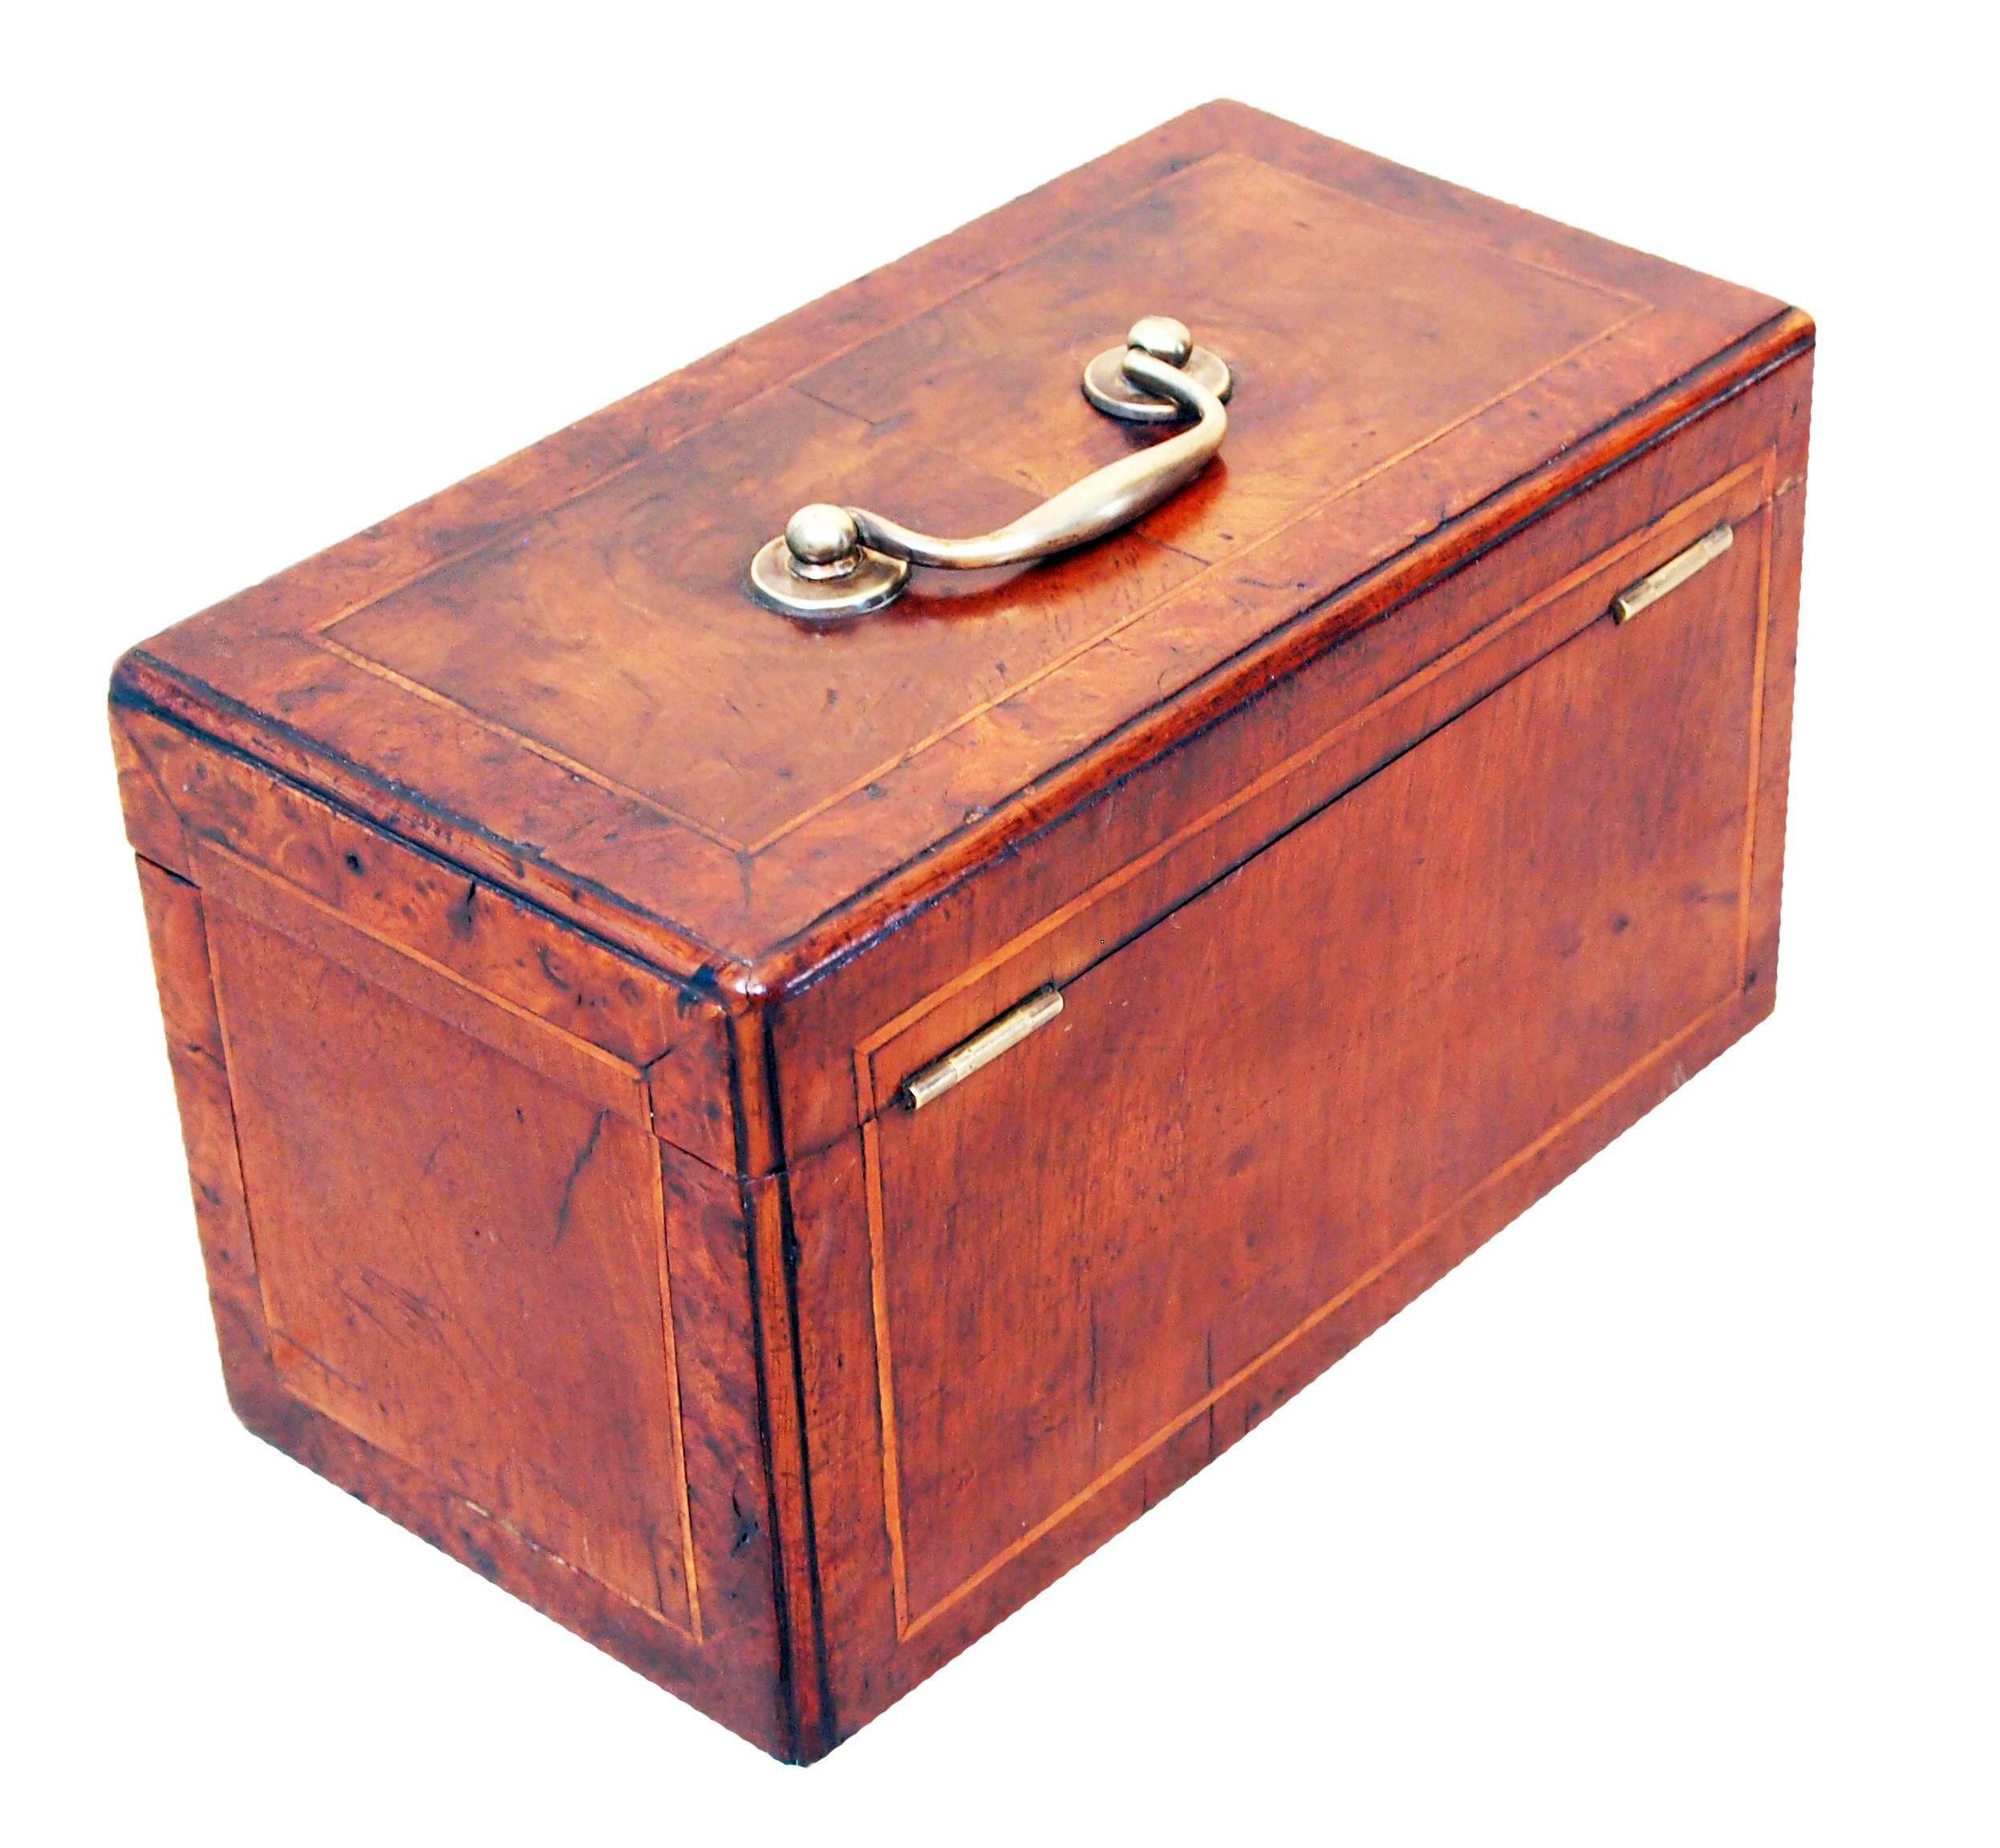 A very attractive mid-18th century walnut tea caddy having re-entrant
molded corners, crossbanded and strung decoration retaining
original brass handle and key escutcheon.

(Tea caddies are of course one of the most collectible antique